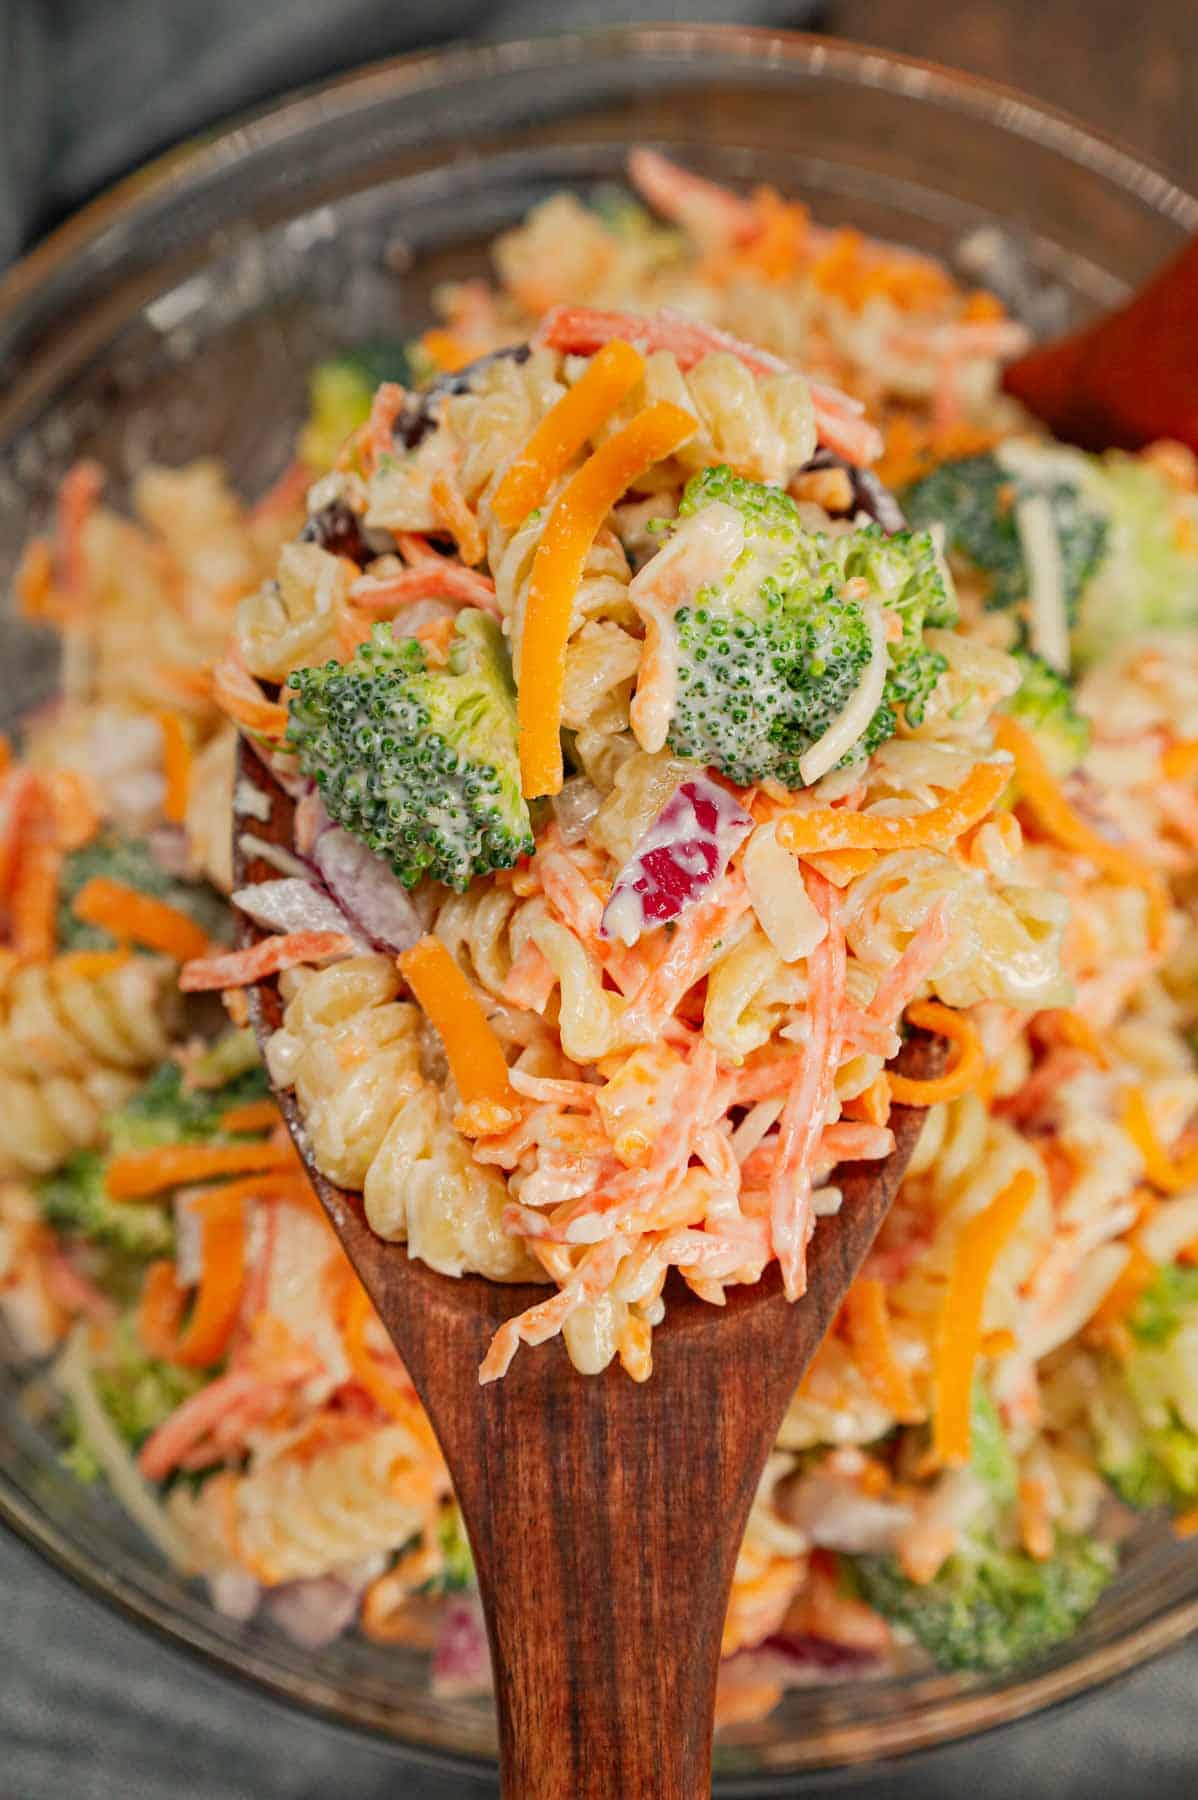 Broccoli Cheddar Pasta Salad is a tasty cold side dish recipe loaded with rotini pasta, broccoli florets, red onions, shredded carrots, cheddar cheese and parmesan all tossed in a mayo and ranch dressing mixture.